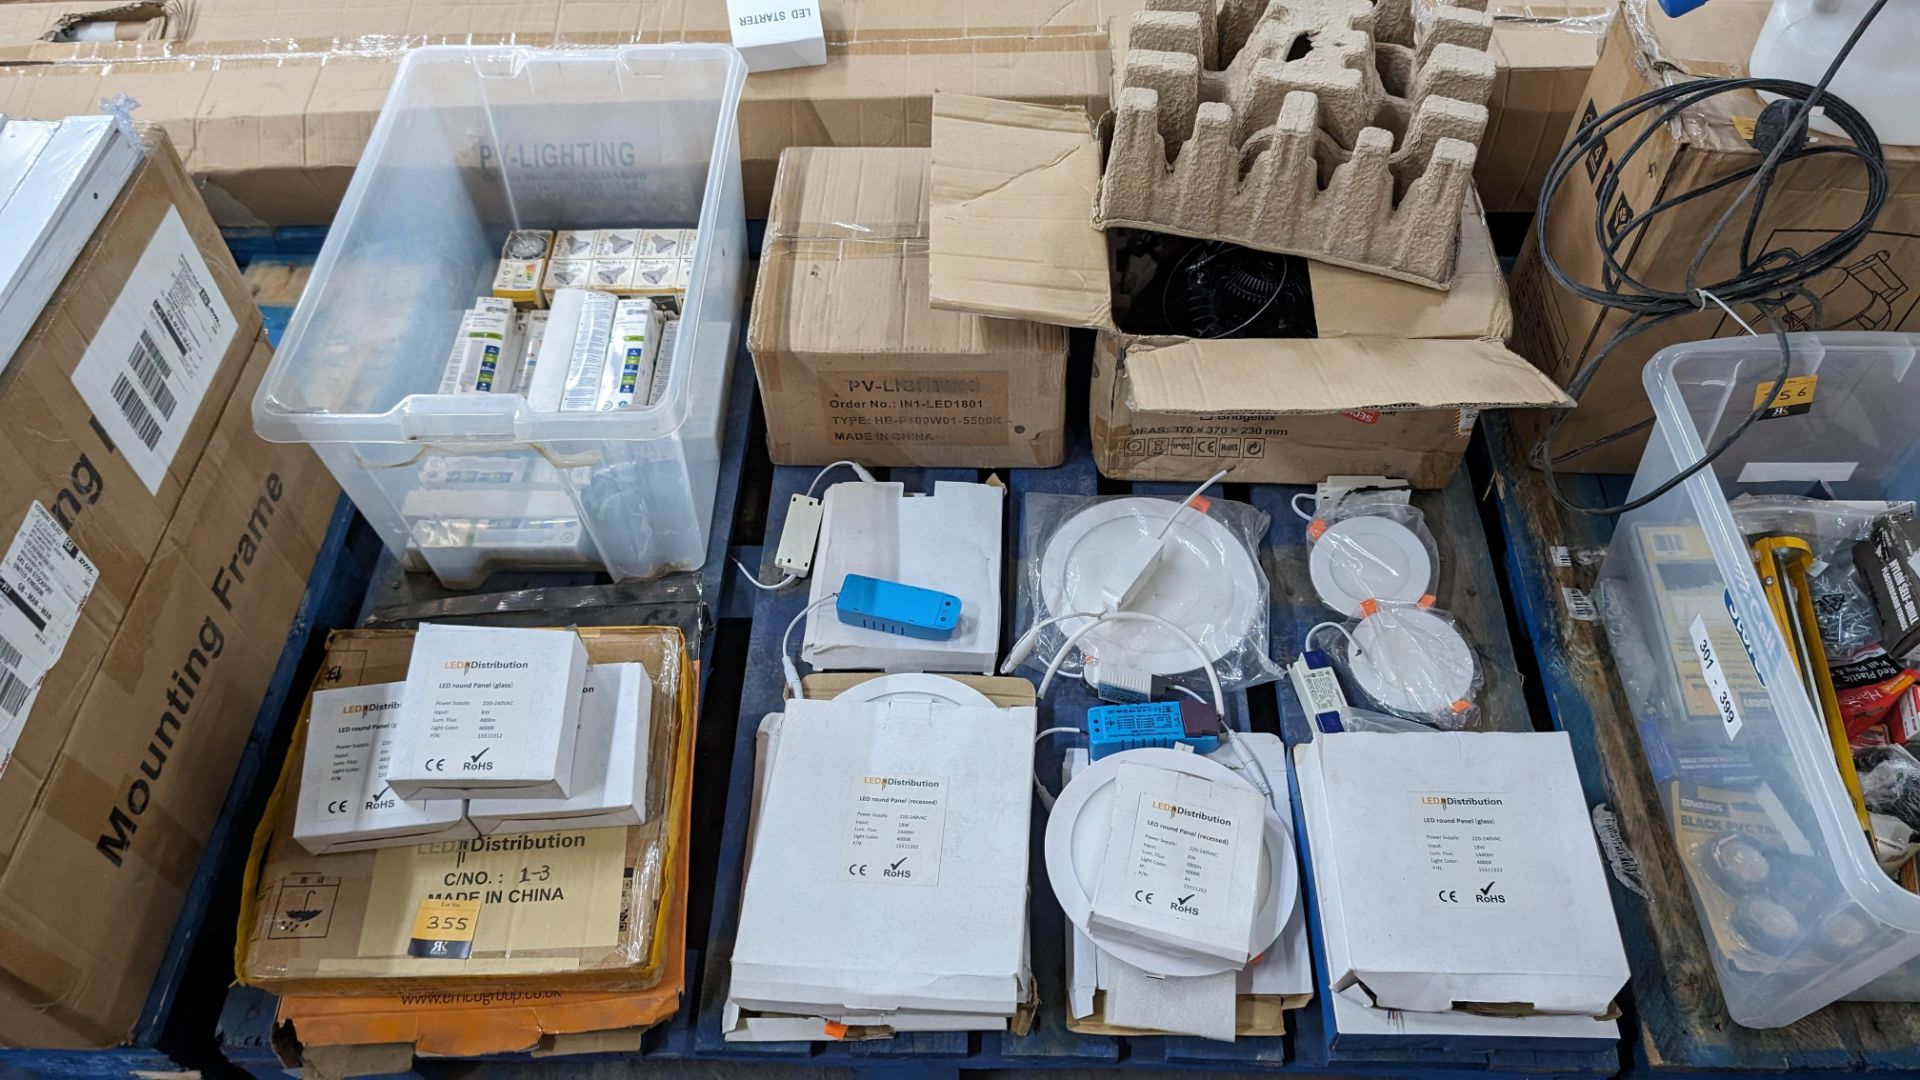 The contents of a pallet of assorted lighting products, including lamps, bulbs and drivers - Image 13 of 13